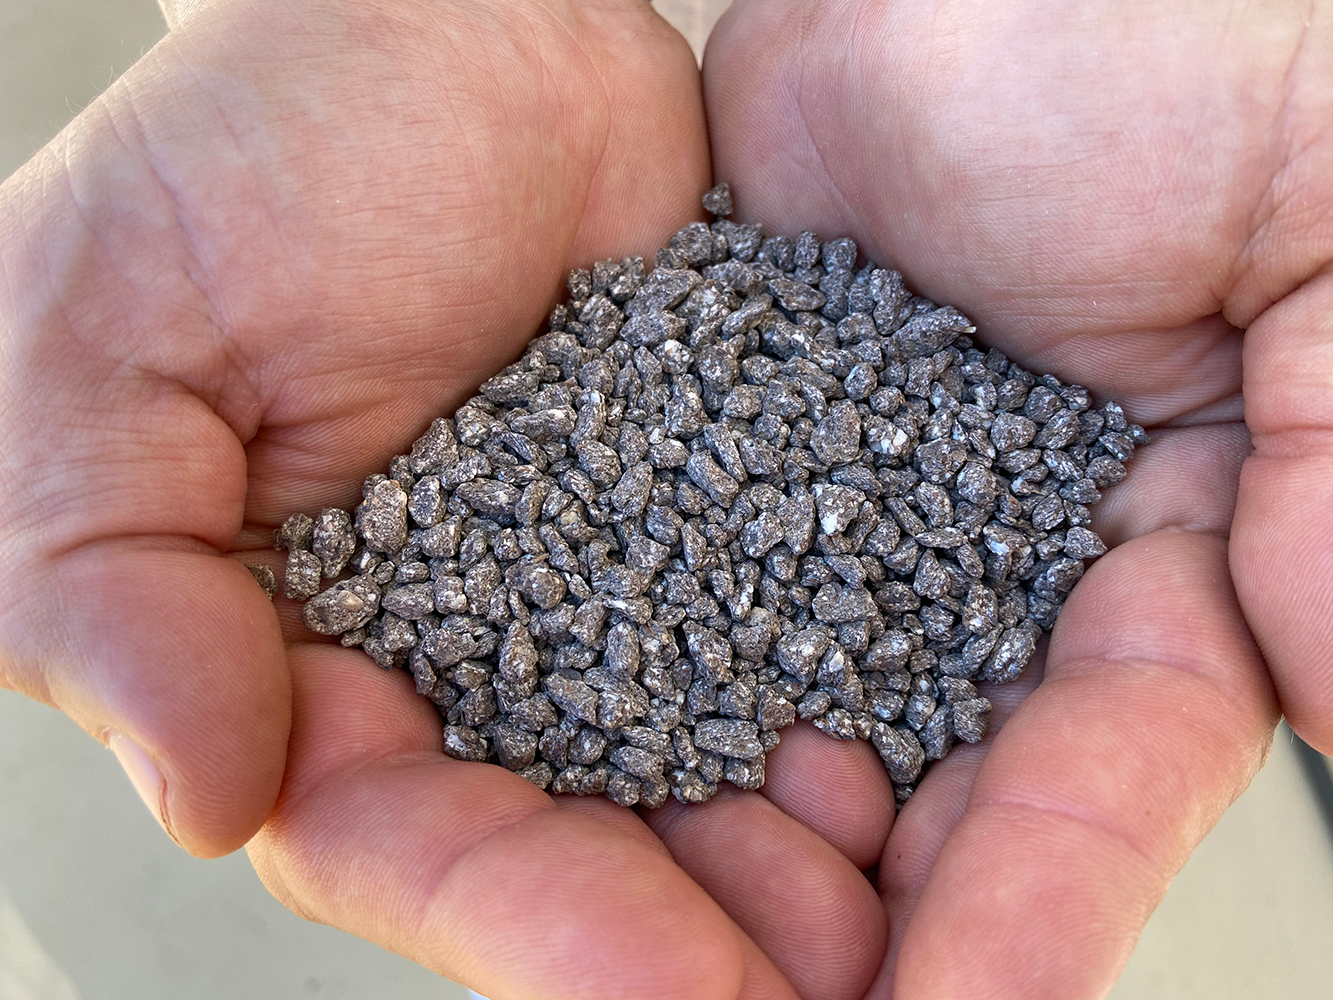 A scoop of fertilizers pictured in hands.